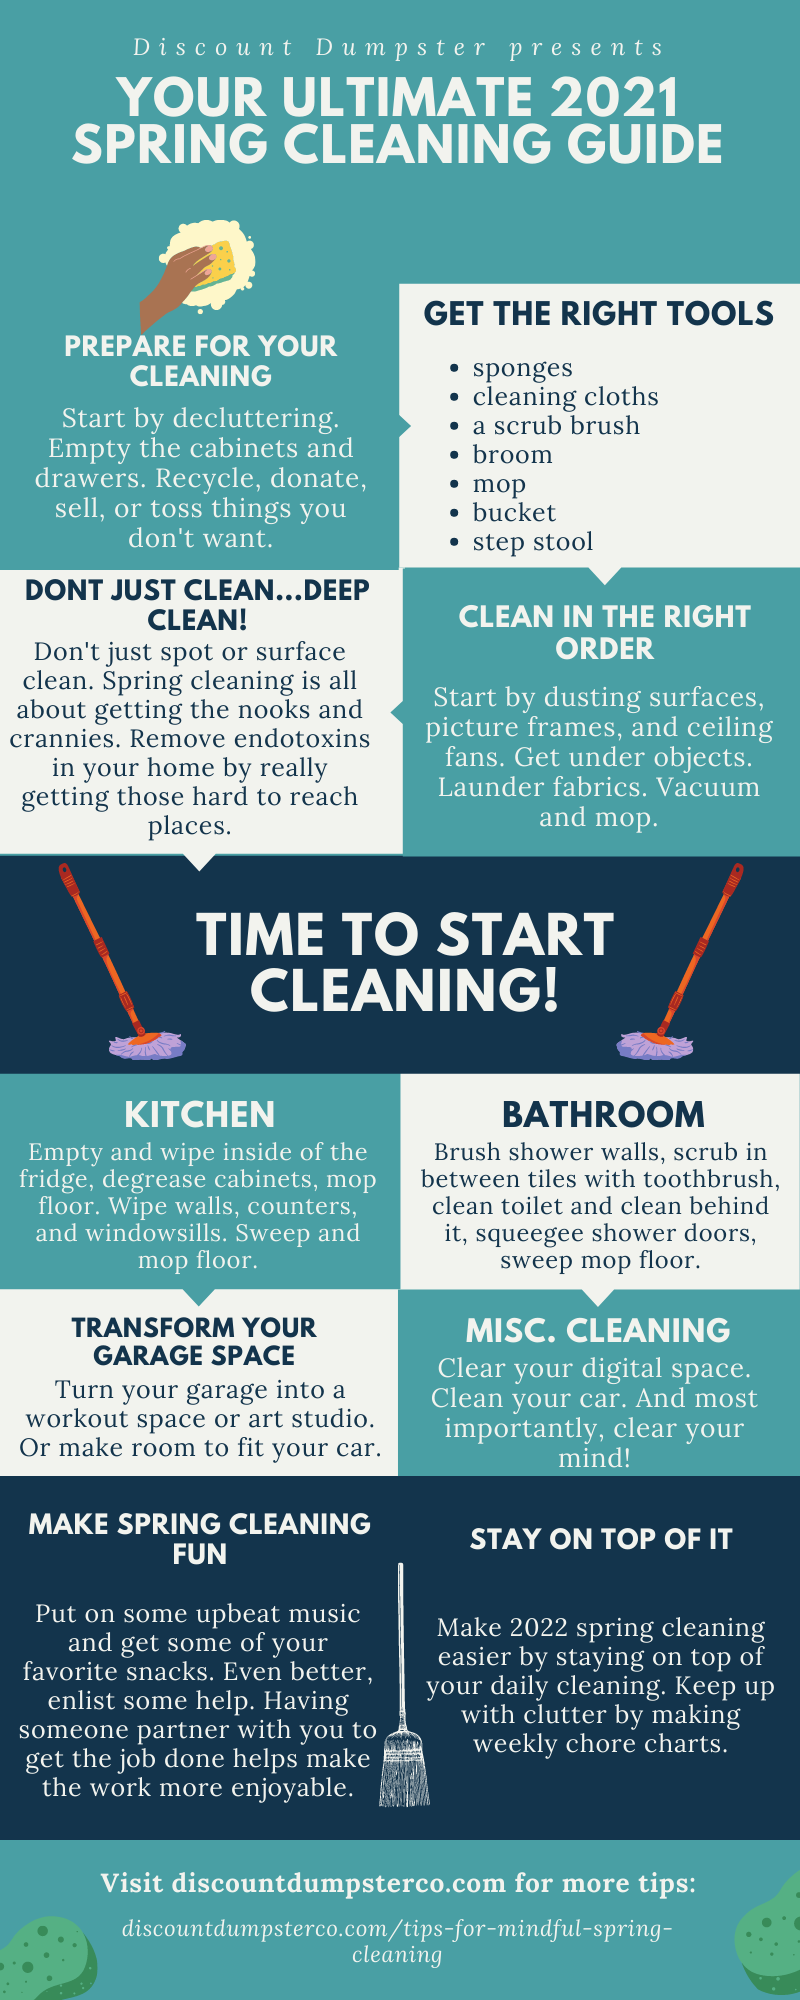 How to clean walls - cleaning tips